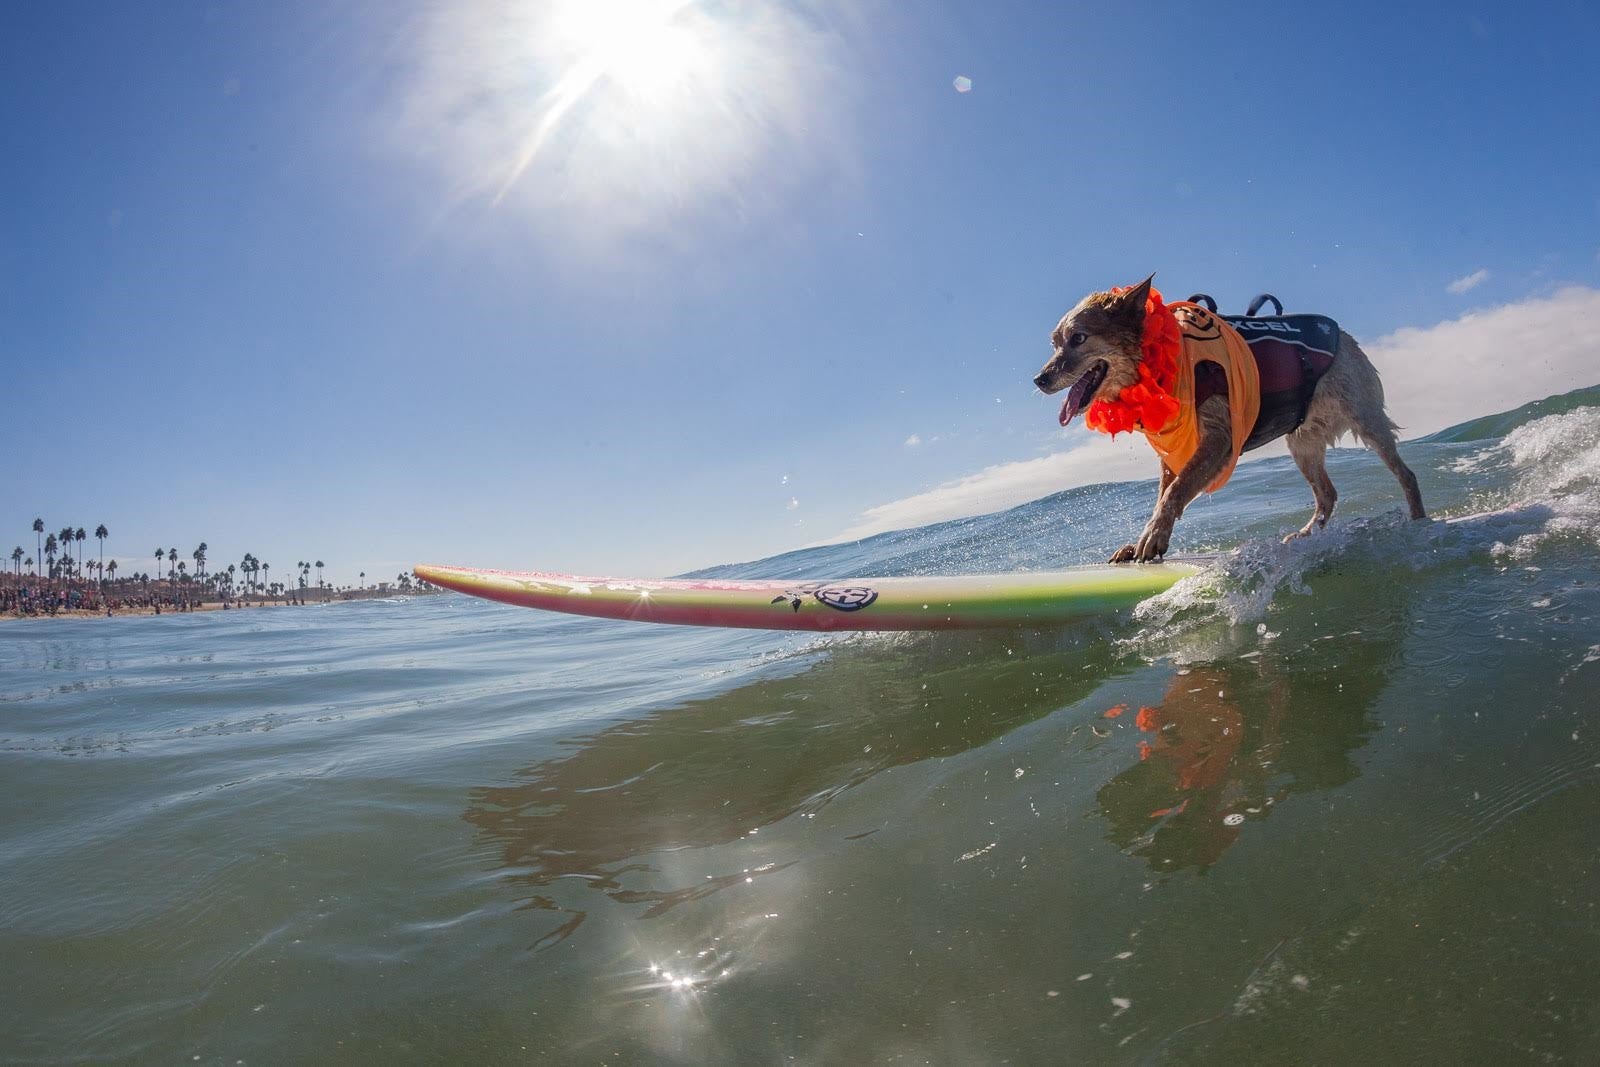 Skyler the surf dog takes to the waves